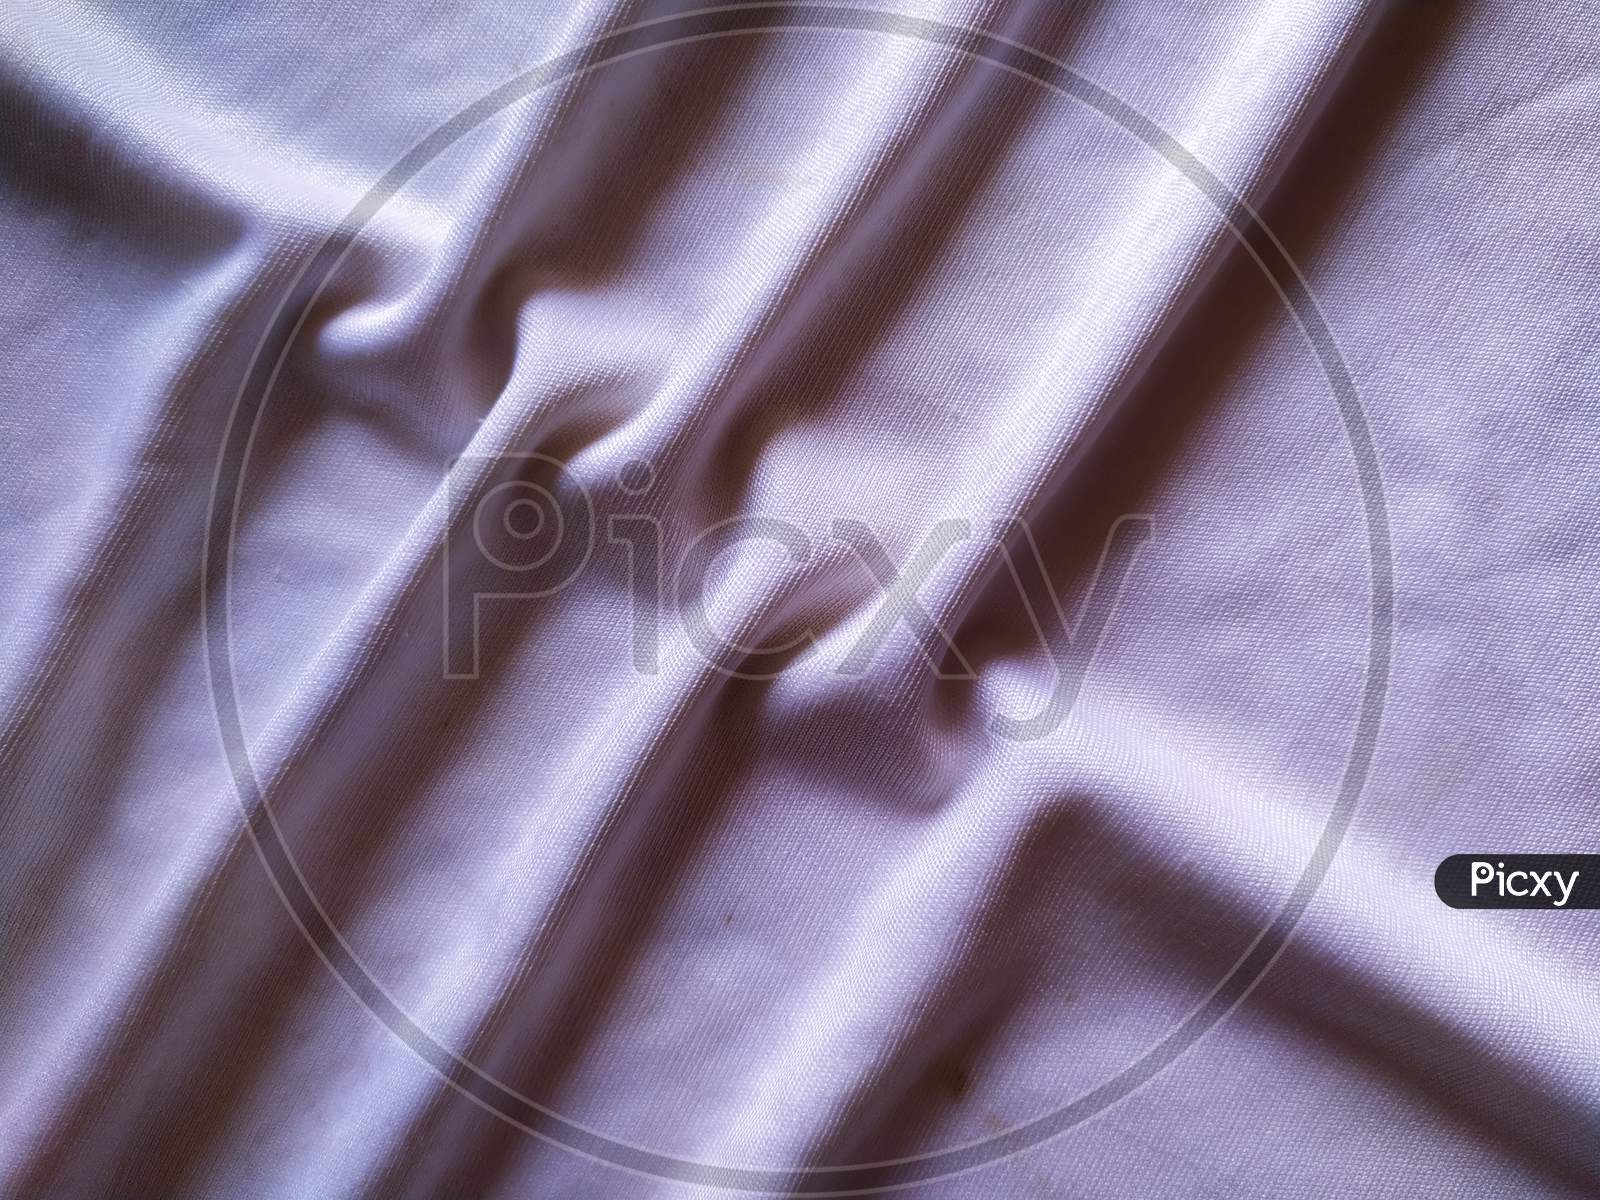 Elegant soft foldings of silk fabric with tint of pink.